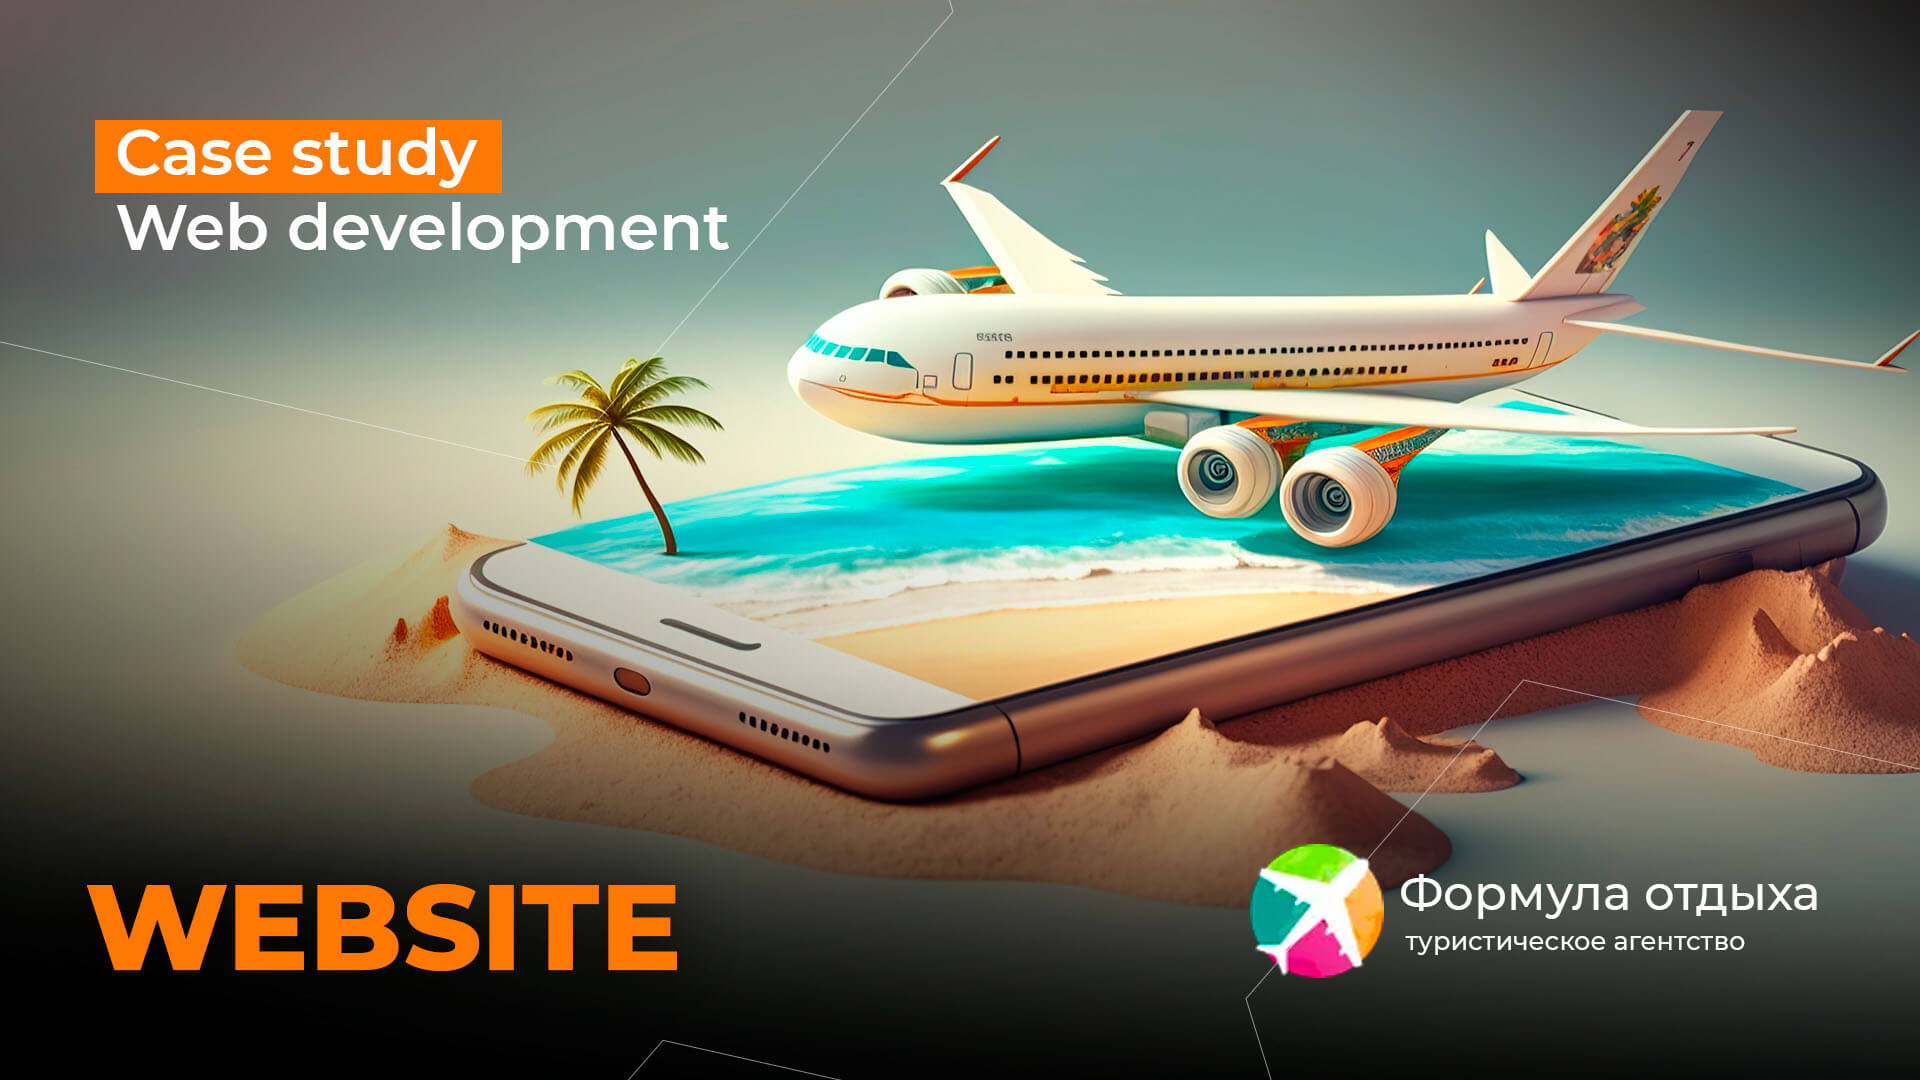 The case of developing a travel agency website